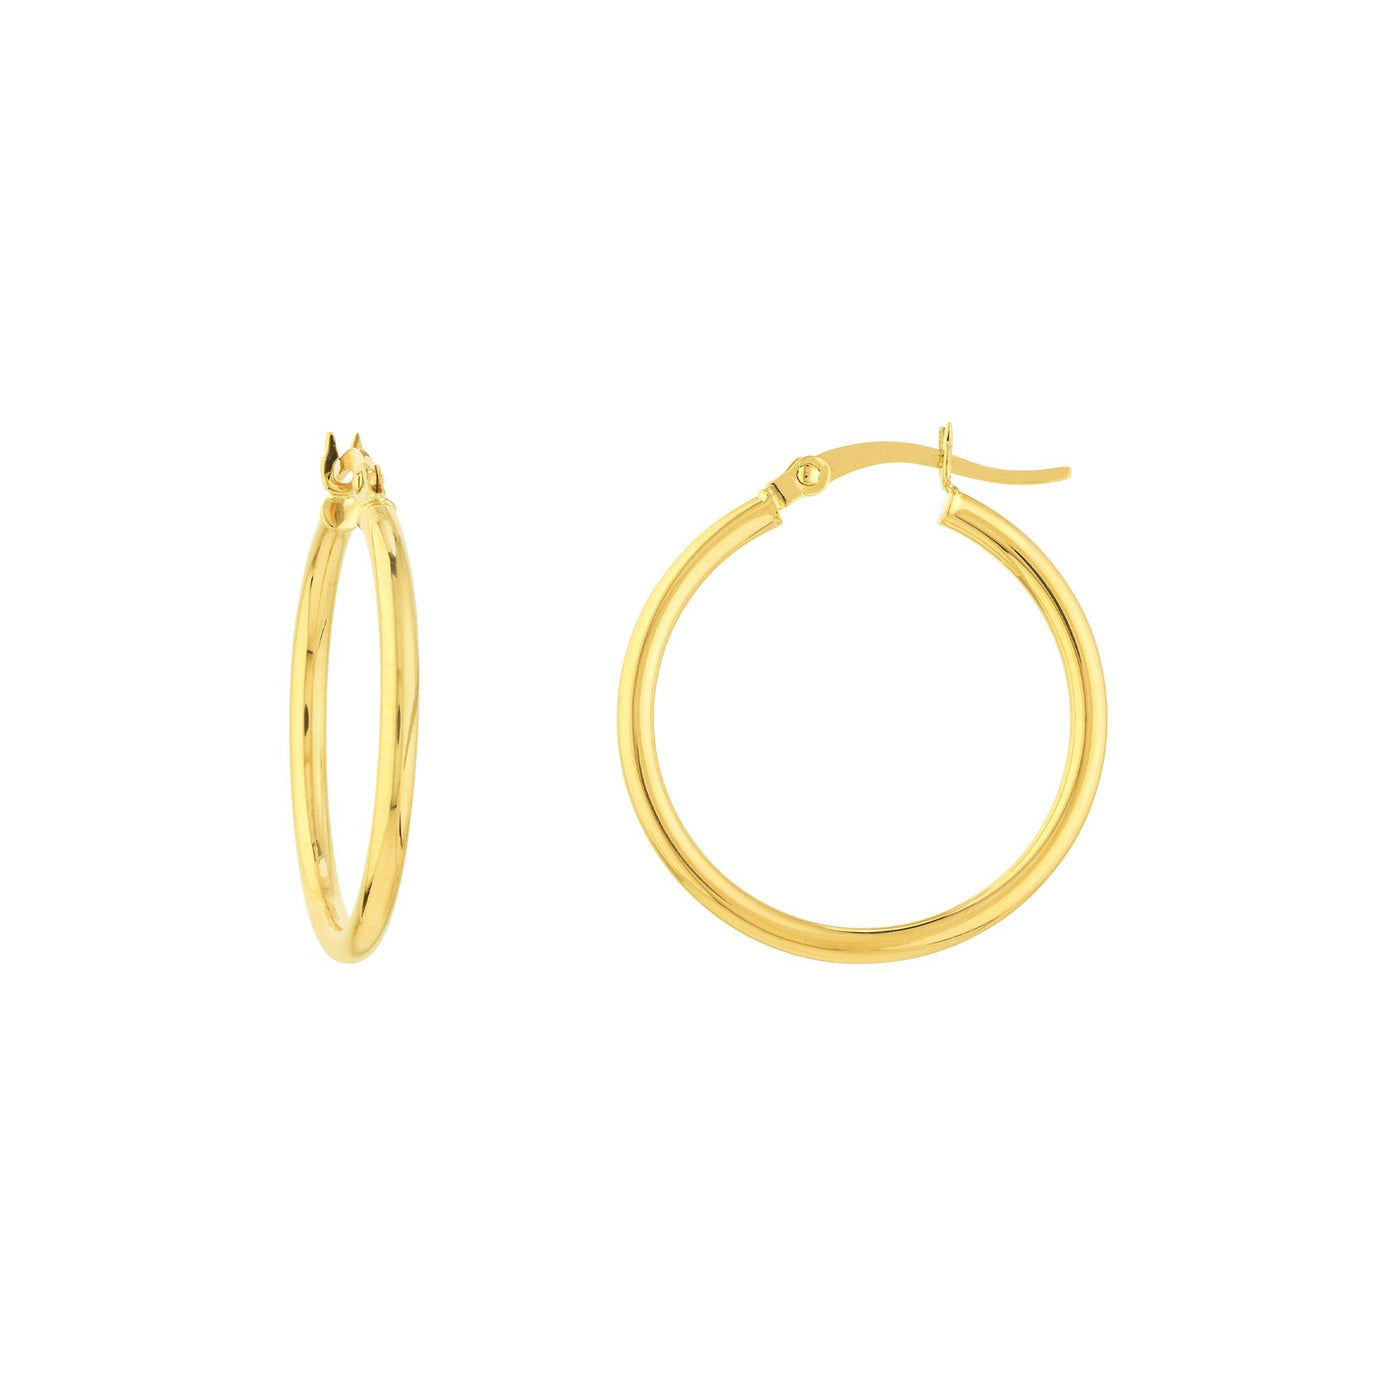 14K Yellow Gold 2mm x 25mm Round Tube Design Round Hoop Style Earrings